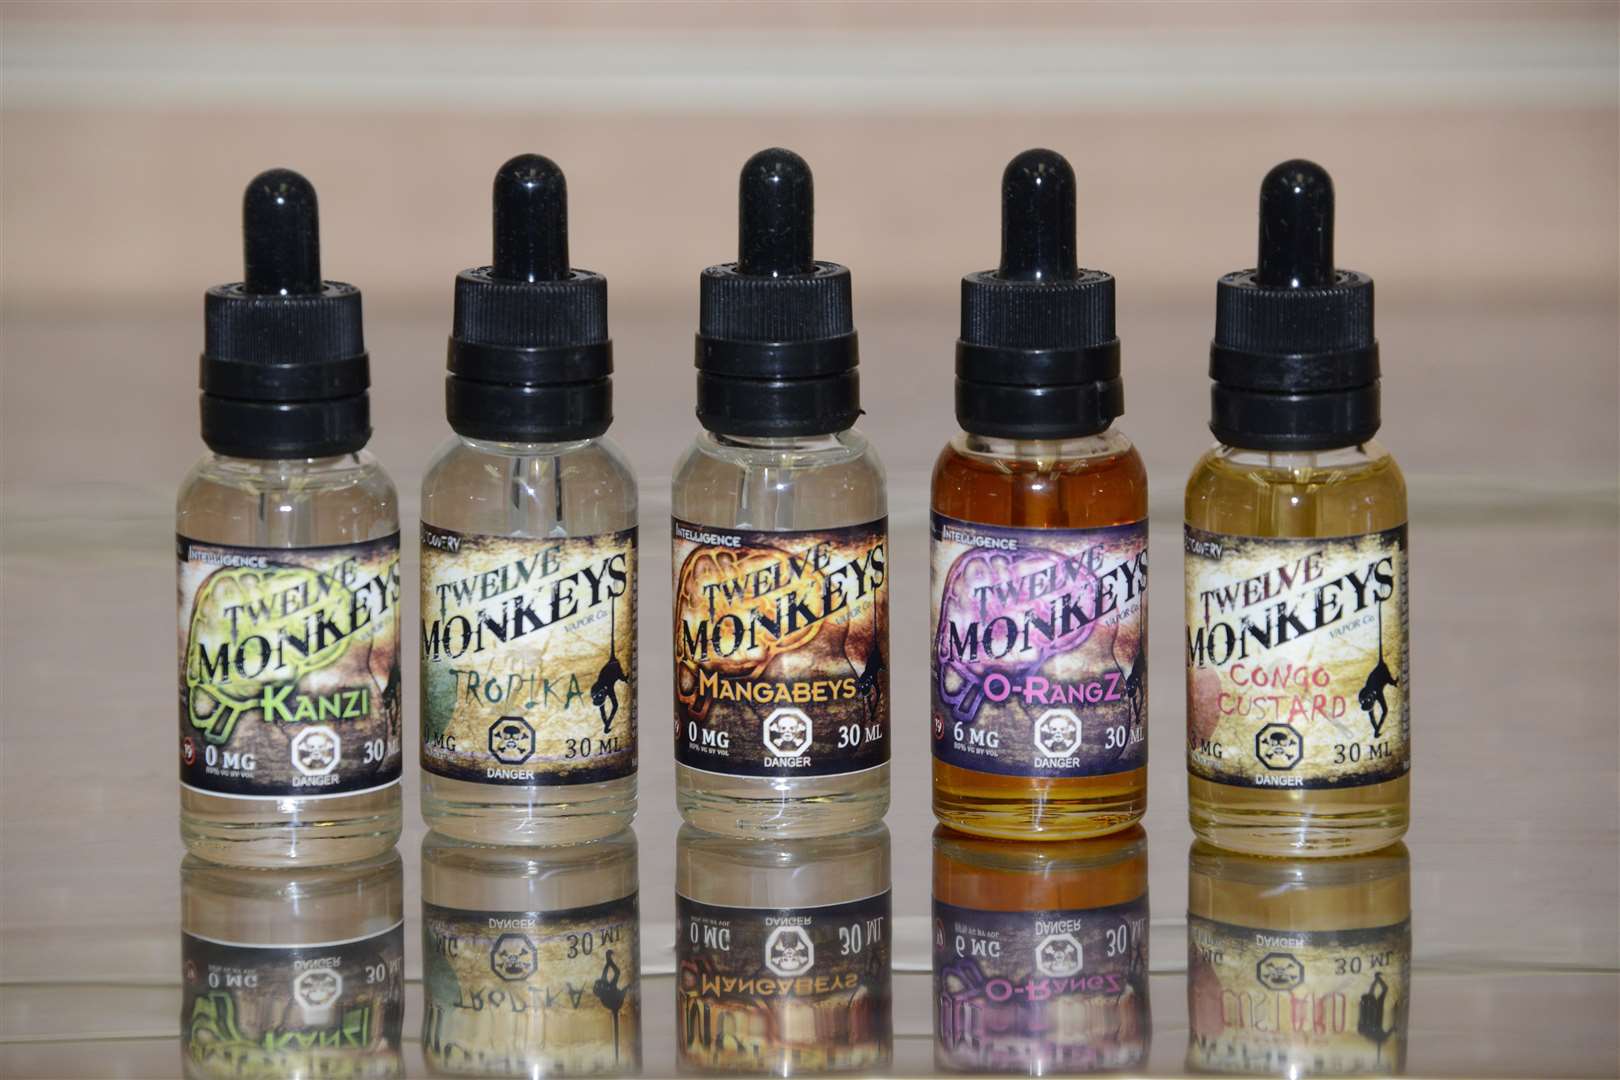 The e-liquids have come in various flavours over the years